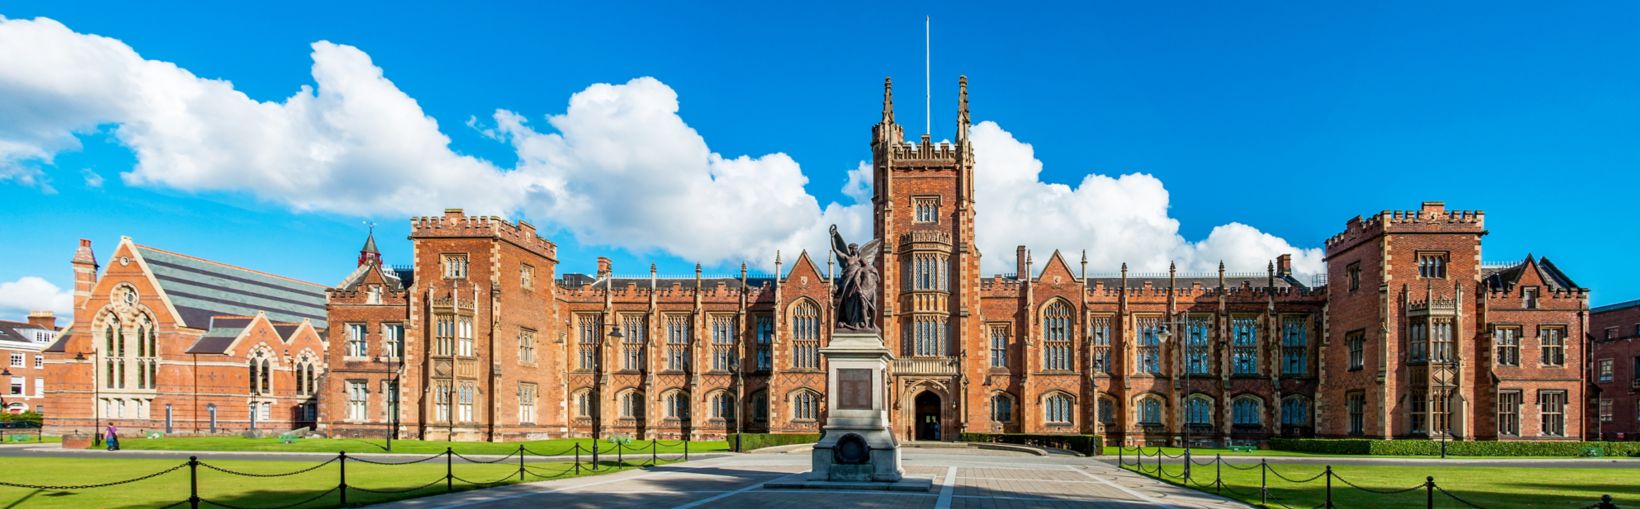 The Queen's University of Belfast with a grass lawn in sunset light. Wide panorama, 